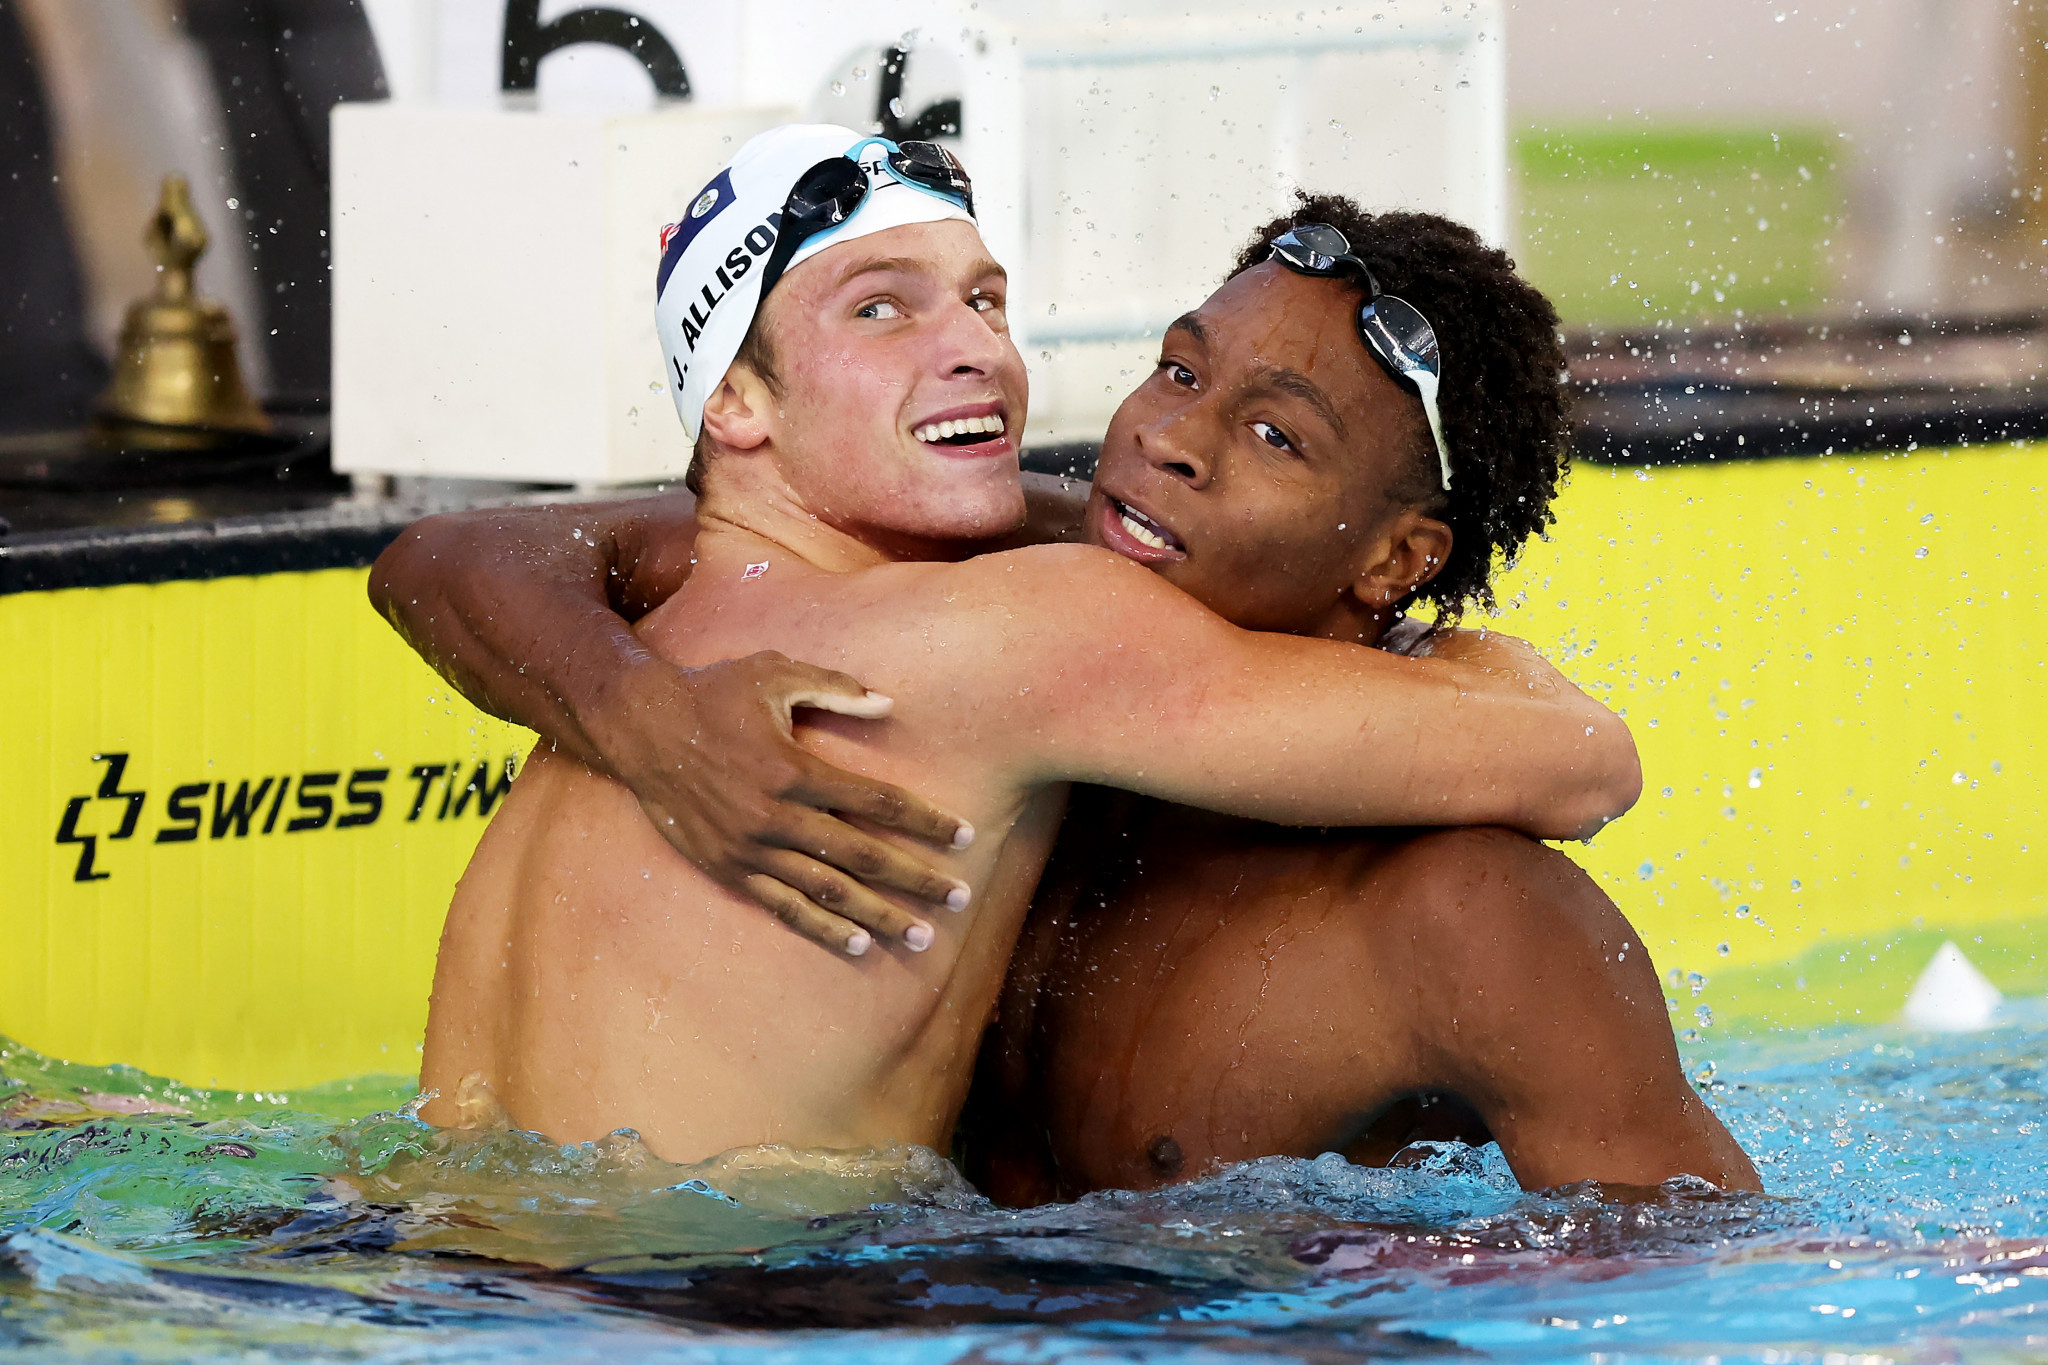 Nikoli Blackman, right, won the men's 200m freestyle final by more than one second ahead of silver medallist James Allison of the Cayman Islands, left ©Getty Images